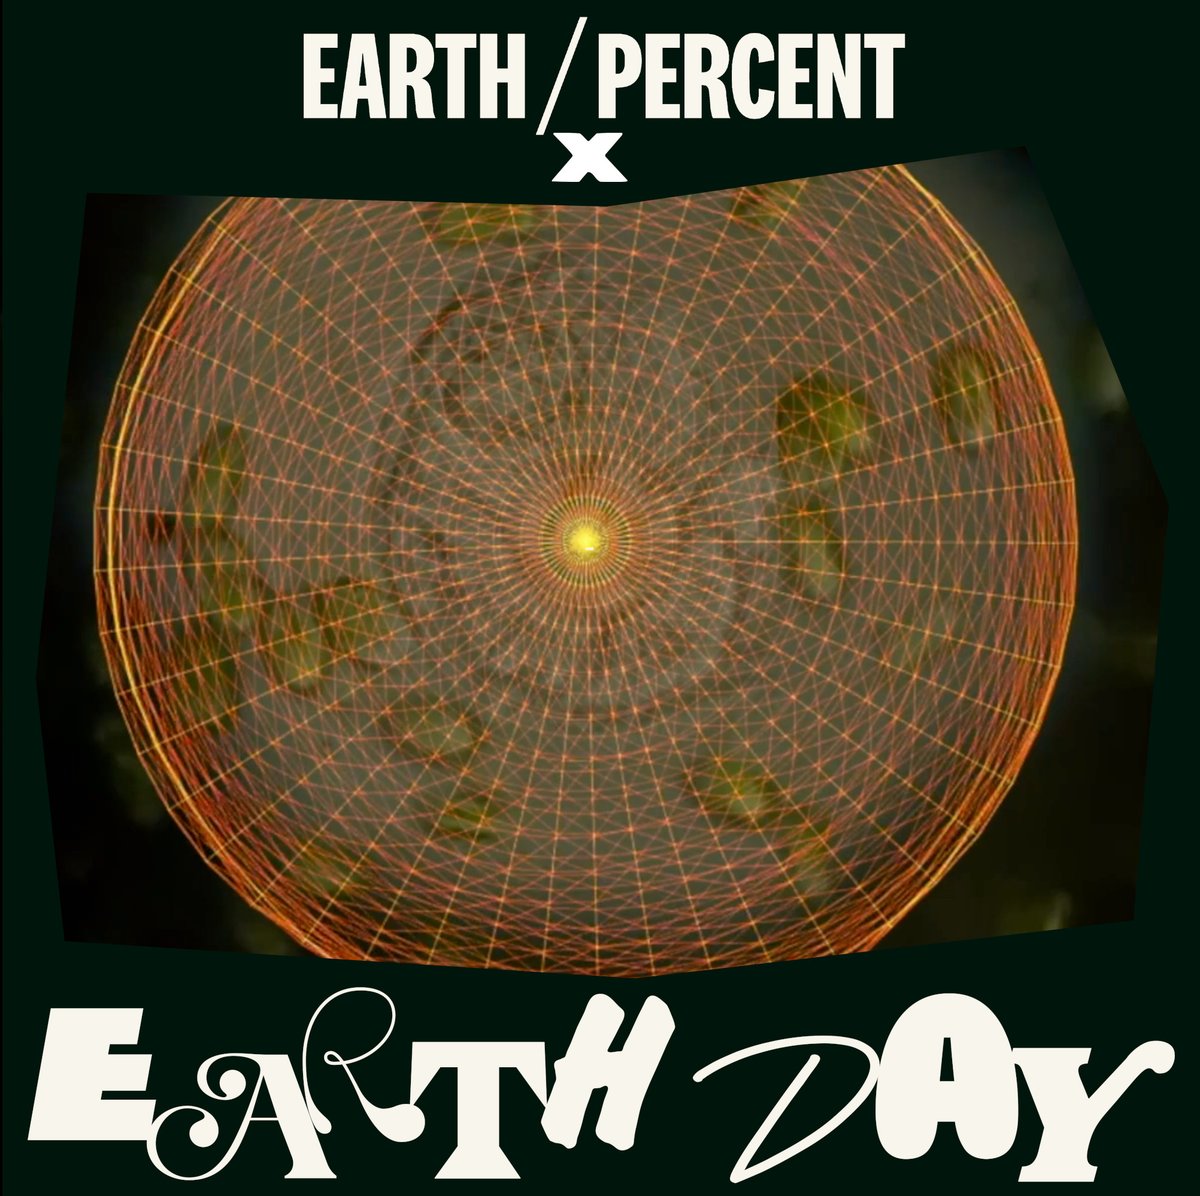 EarthPercent is LIVE. I am proud to highlight my ongoing work with climate-critical marine science by offering an exclusive mix of my @prsfoundation supported work with @HobbsLJ Zooplankton Nocturne: omnempathy.bandcamp.com/track/arctic-m…
#EarthPercentEarthDay #NOMUSICONADEADPLANET